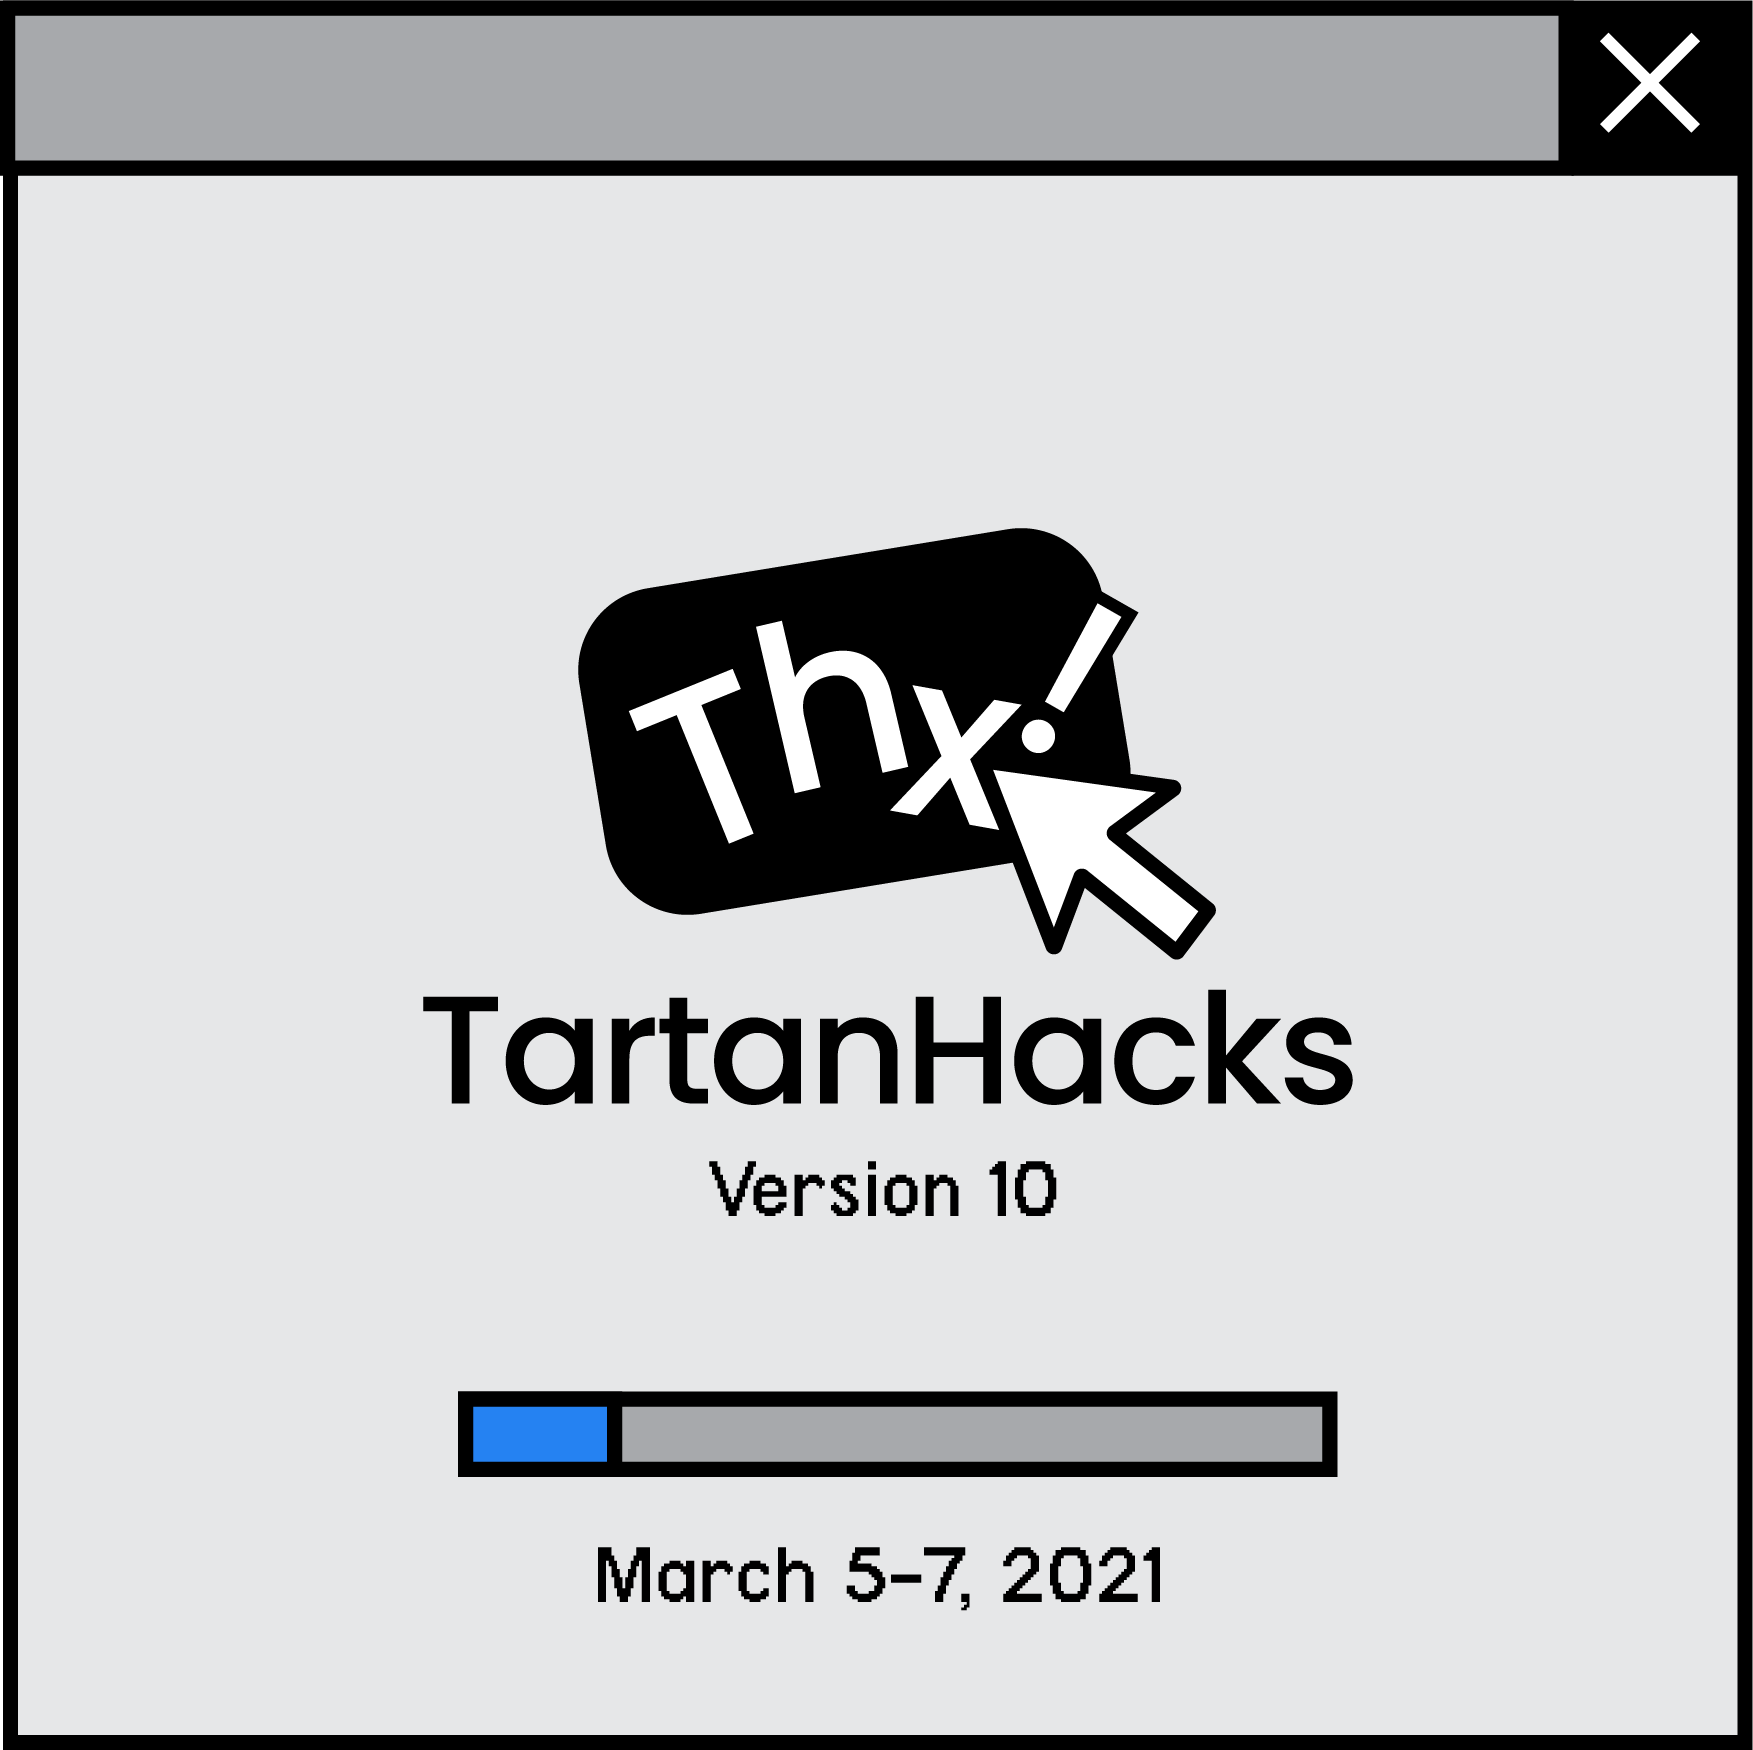 TartanHacks logo made in the style of early Mac OS graphics. Gray window that reads Thx! TartanHacks Version 10 March 5-7, 2021